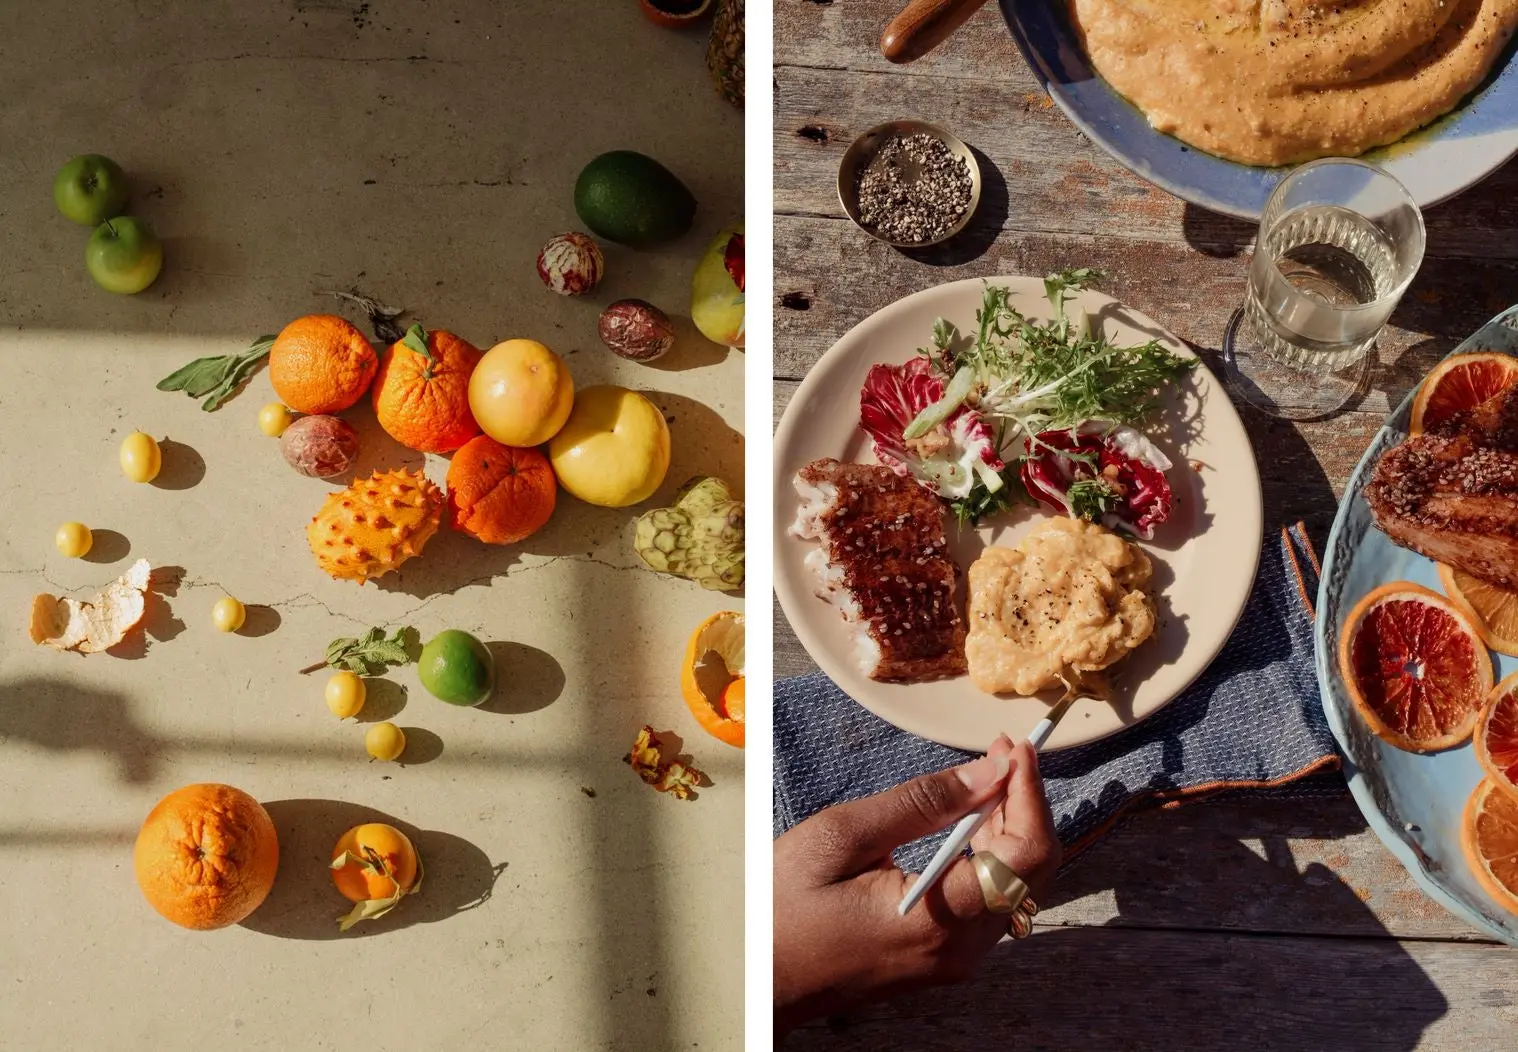 Left image, assortment of fruit, right image, a plate full of food. 